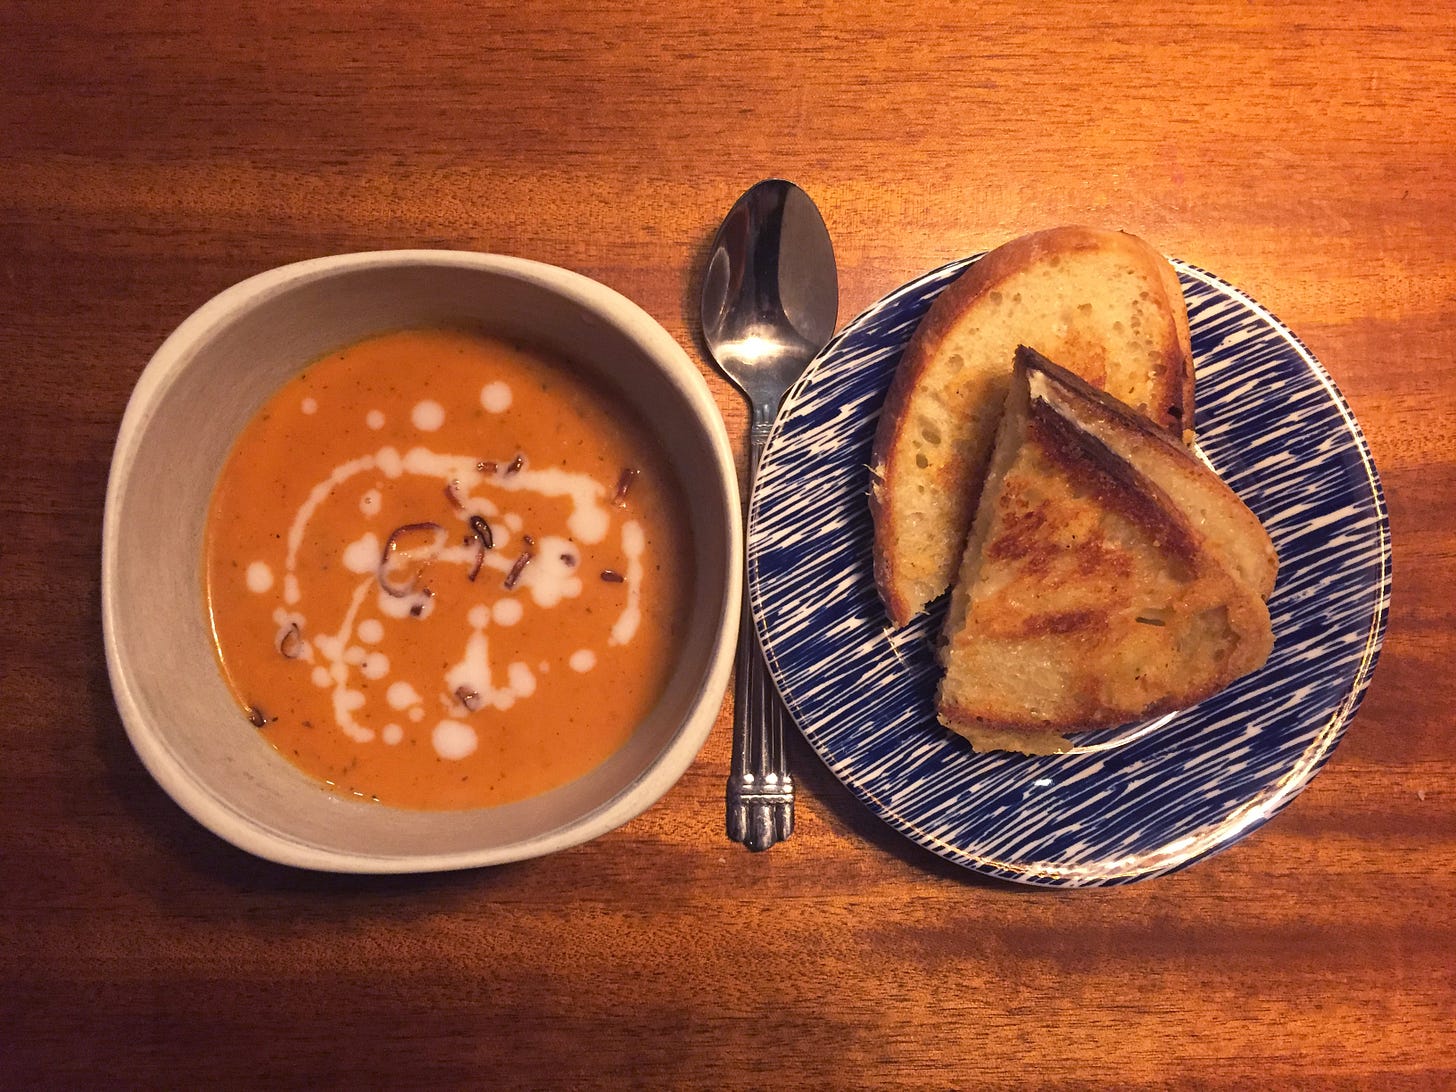 A white bowl of tomato soup with a drizzle of coconut milk and a scattering of fried shallots. Next to it, a small blue plate with halves of a grilled cheese sandwich stacked offset each other. A spoon is in between the two dishes.